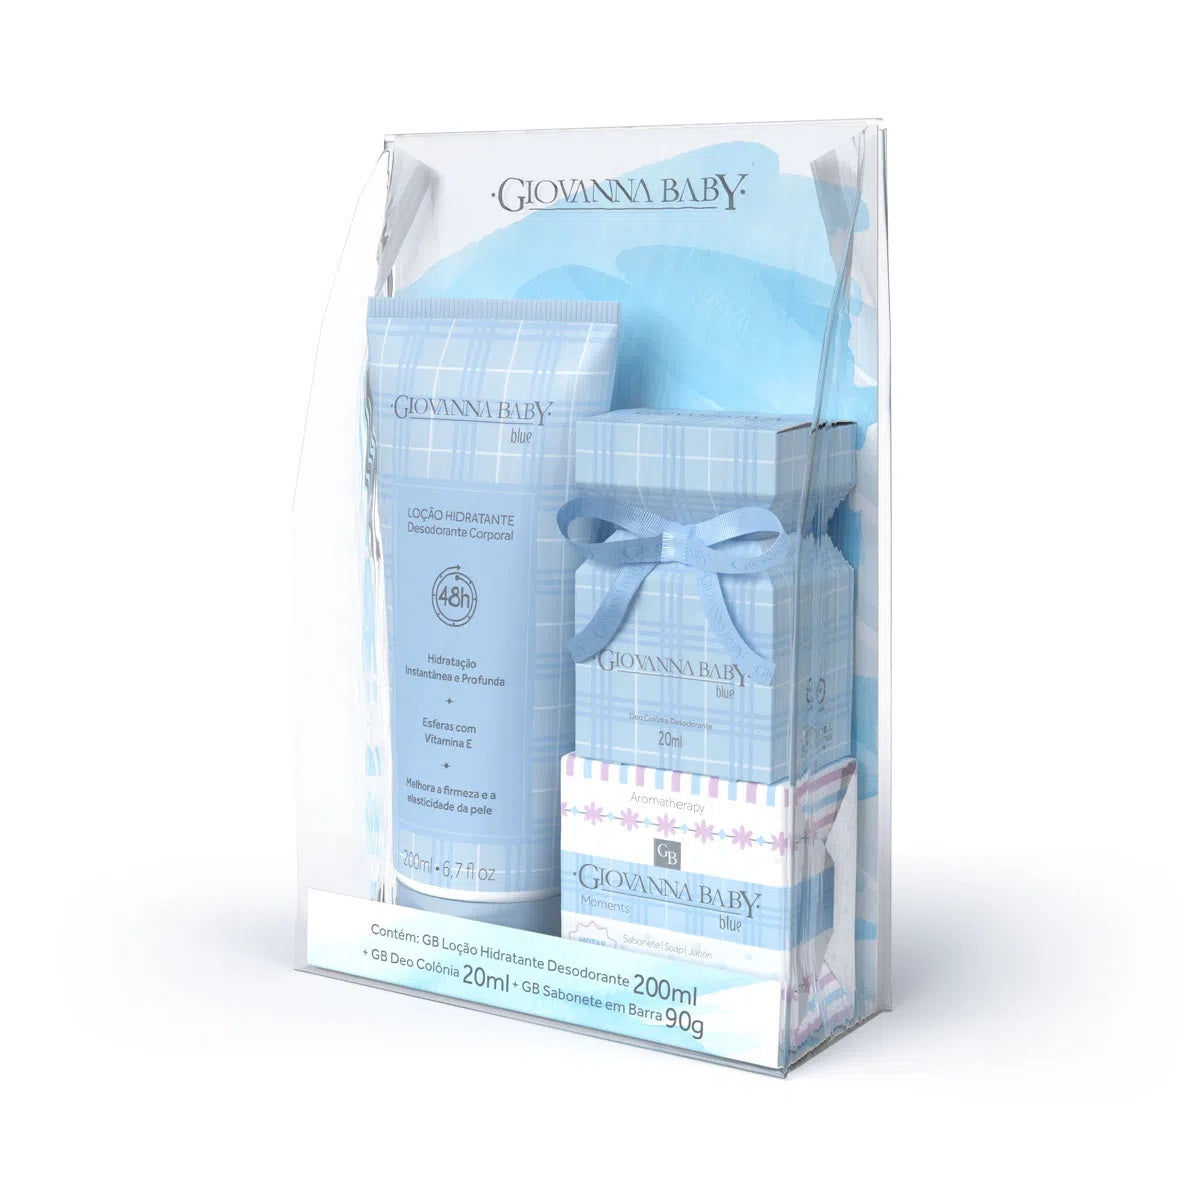 Giovanna Baby Blue Moisturizing Cologne and Soap Kit